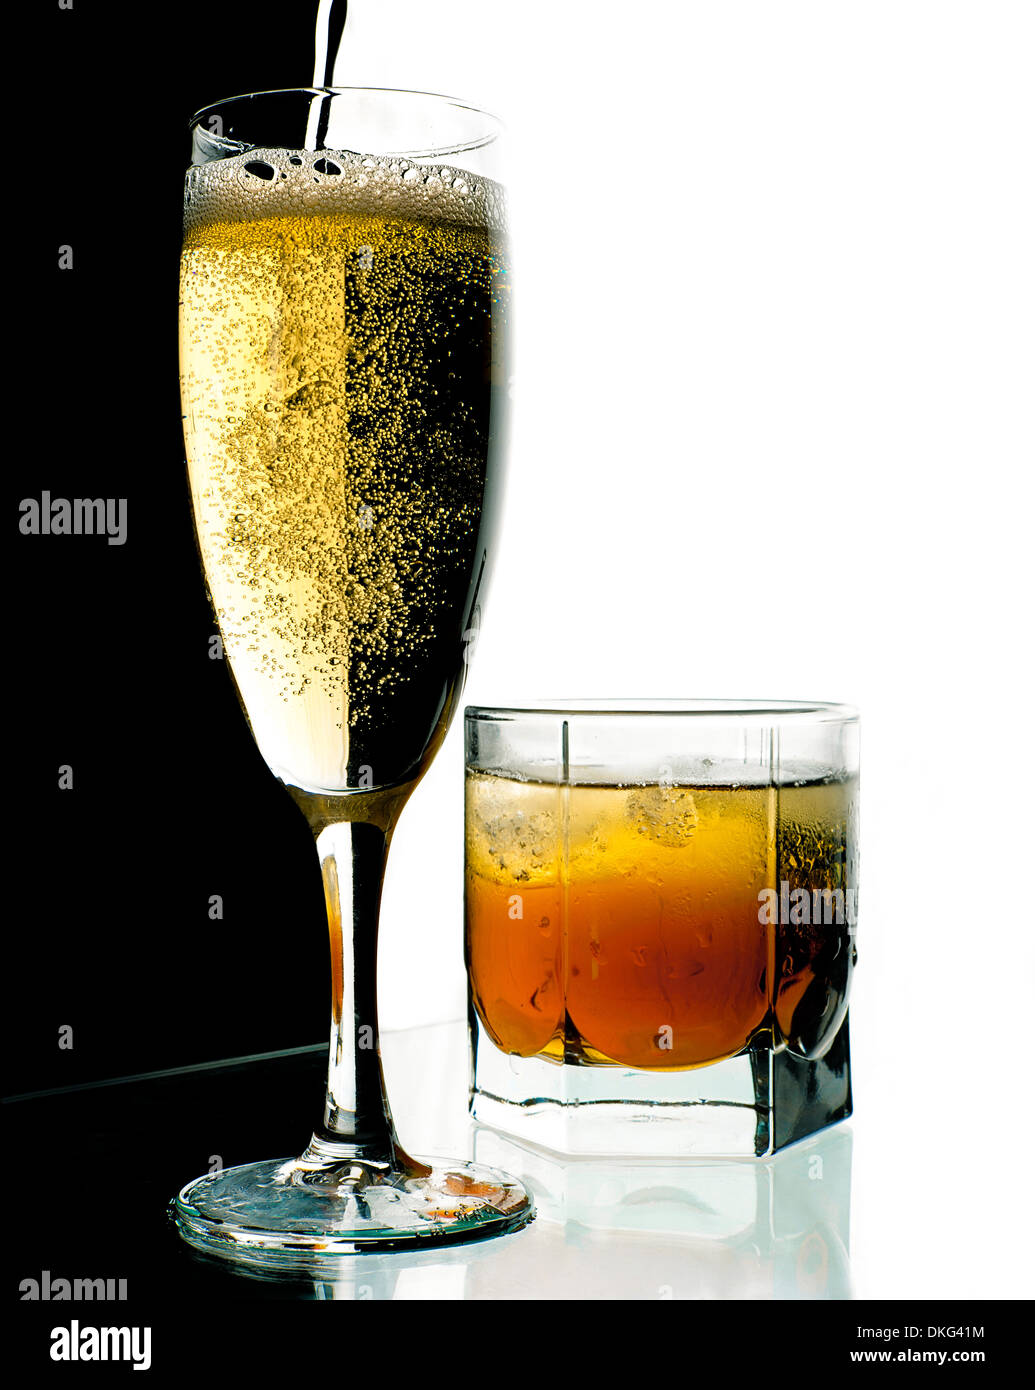 Glass of champagne and whiskey with ice. A black and white background. Stock Photo